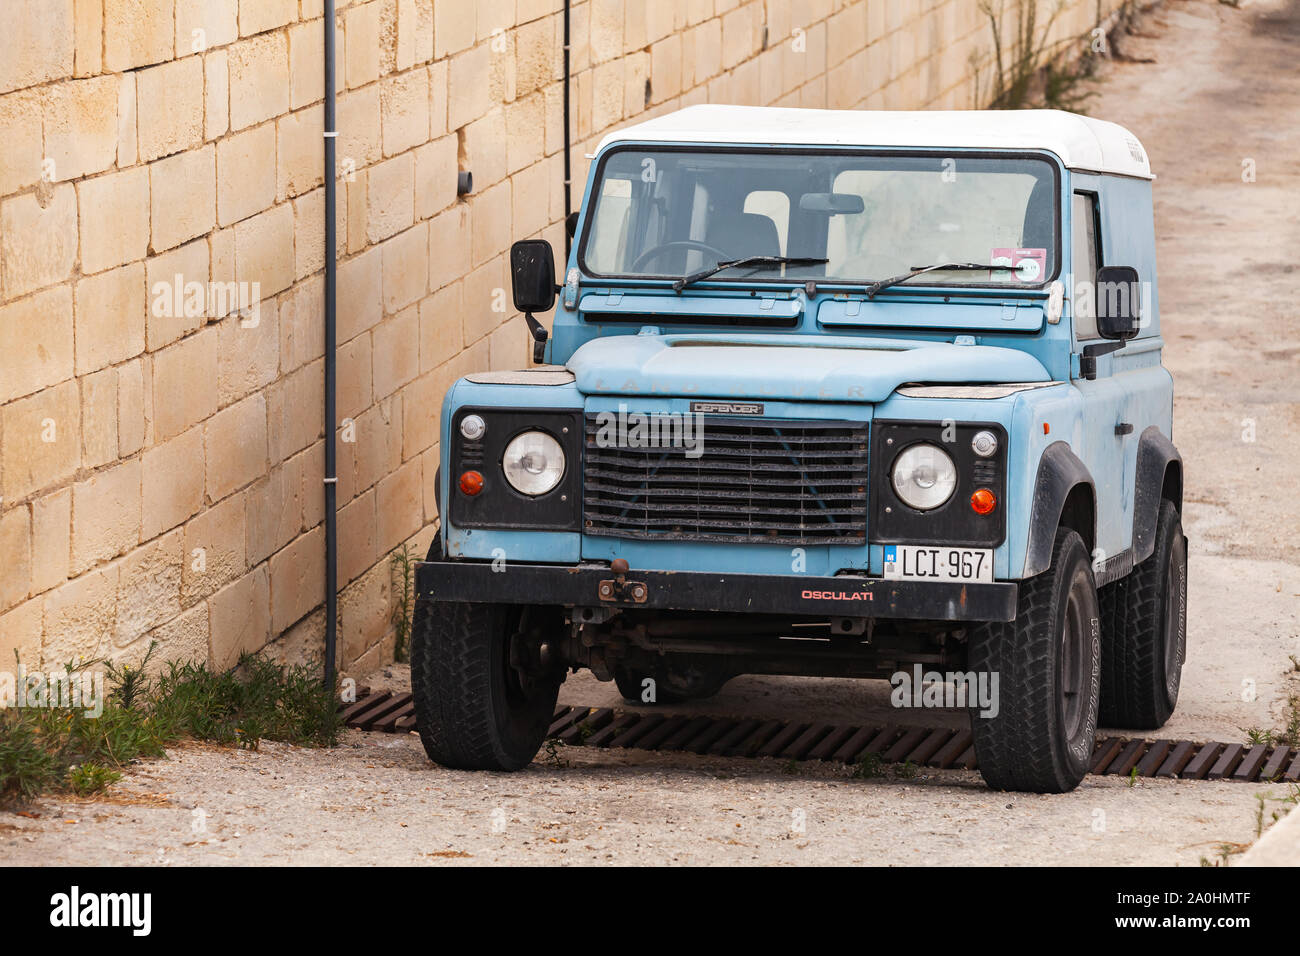 Cirkewwa, Malta - August 29, 2019: Blue Land Rover Defender stands on a roadside. This is a British four-wheel drive off-road vehicle developed in the Stock Photo